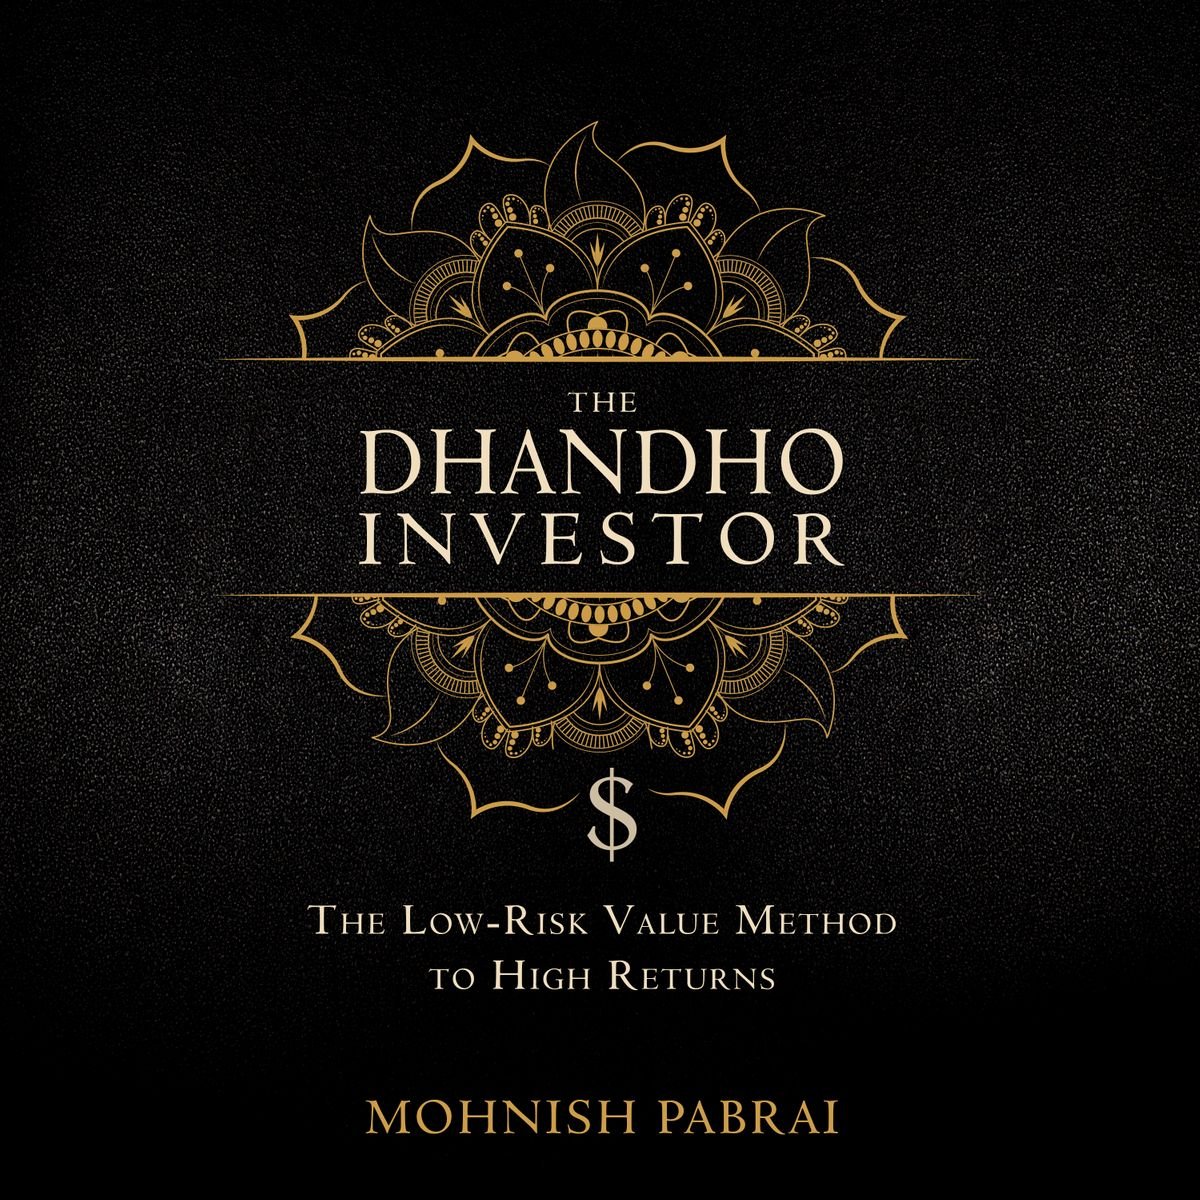 Dhandho investing in stocks passive commercial real estate investing